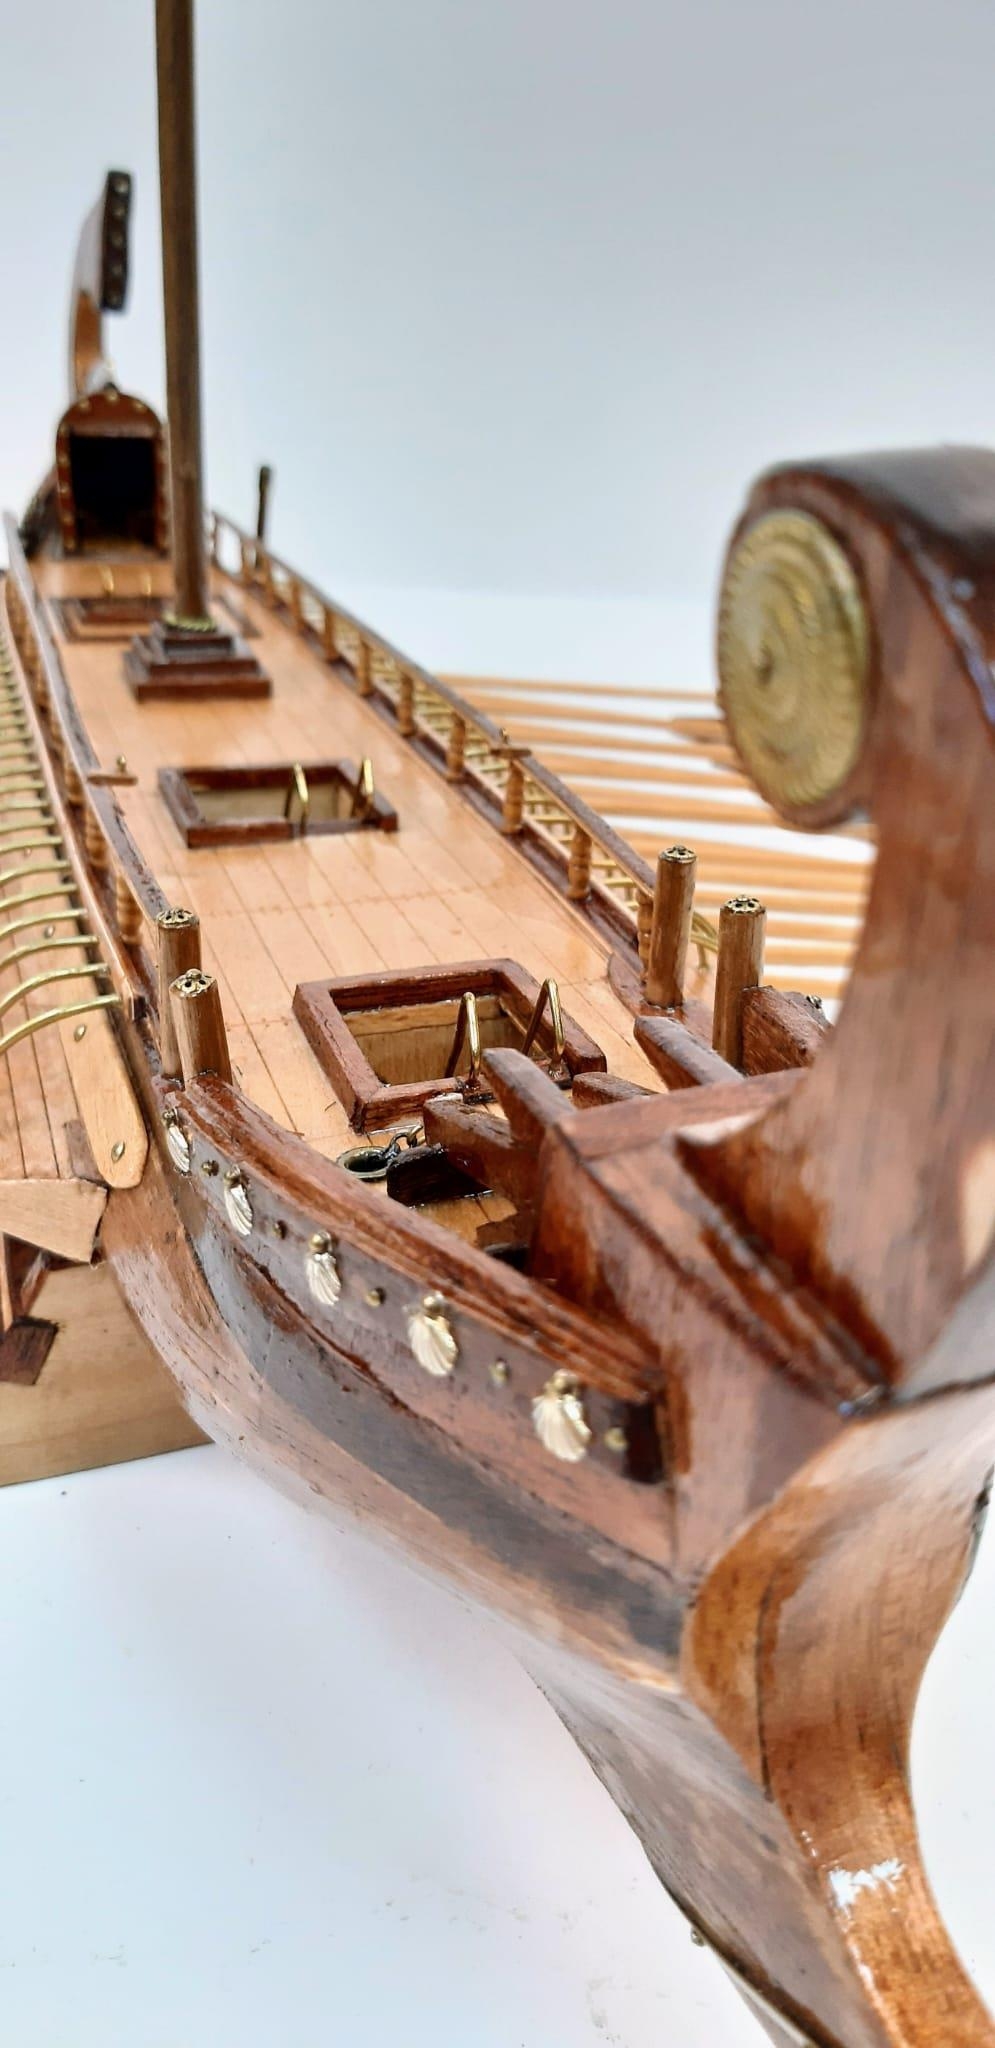 A Hand Crafted Wooden Viking Long Ship in Excellent Condition. 60cm in length. - Image 9 of 10